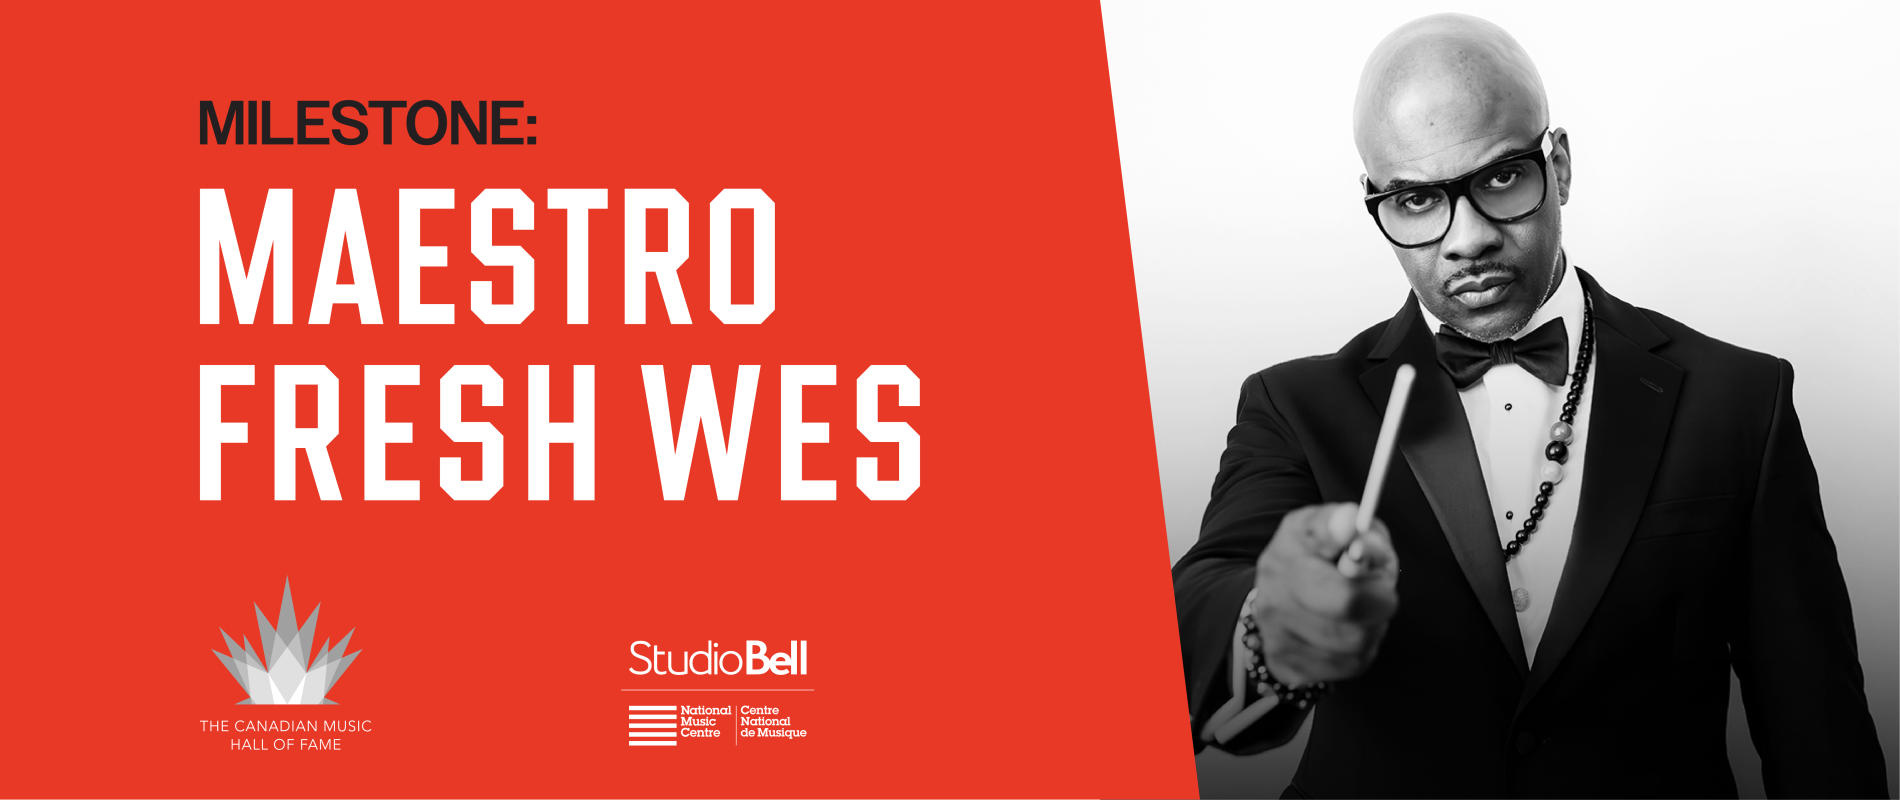 National Music Centre Launches Exhibition Dedicated to Hip-Hop Pioneer Maestro Fresh Wes on May 15